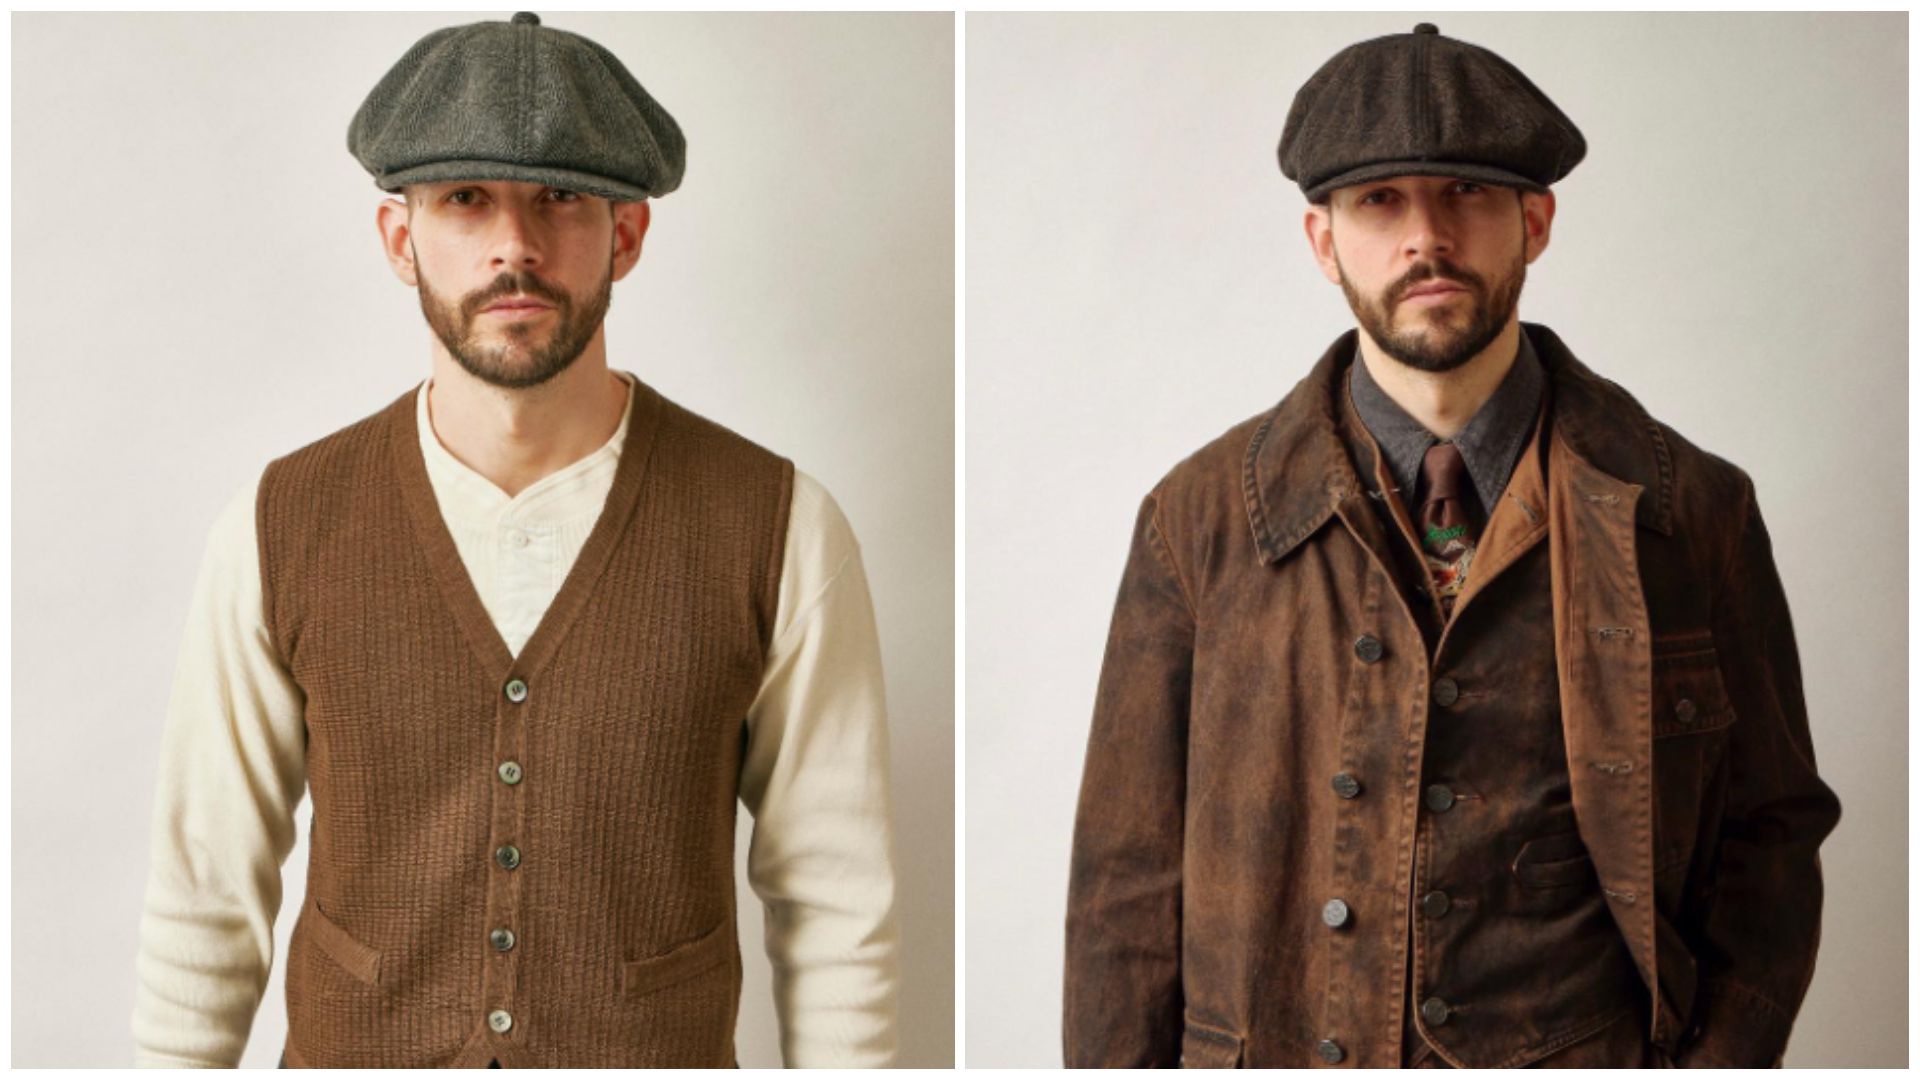 A man has styled two flat cap differently